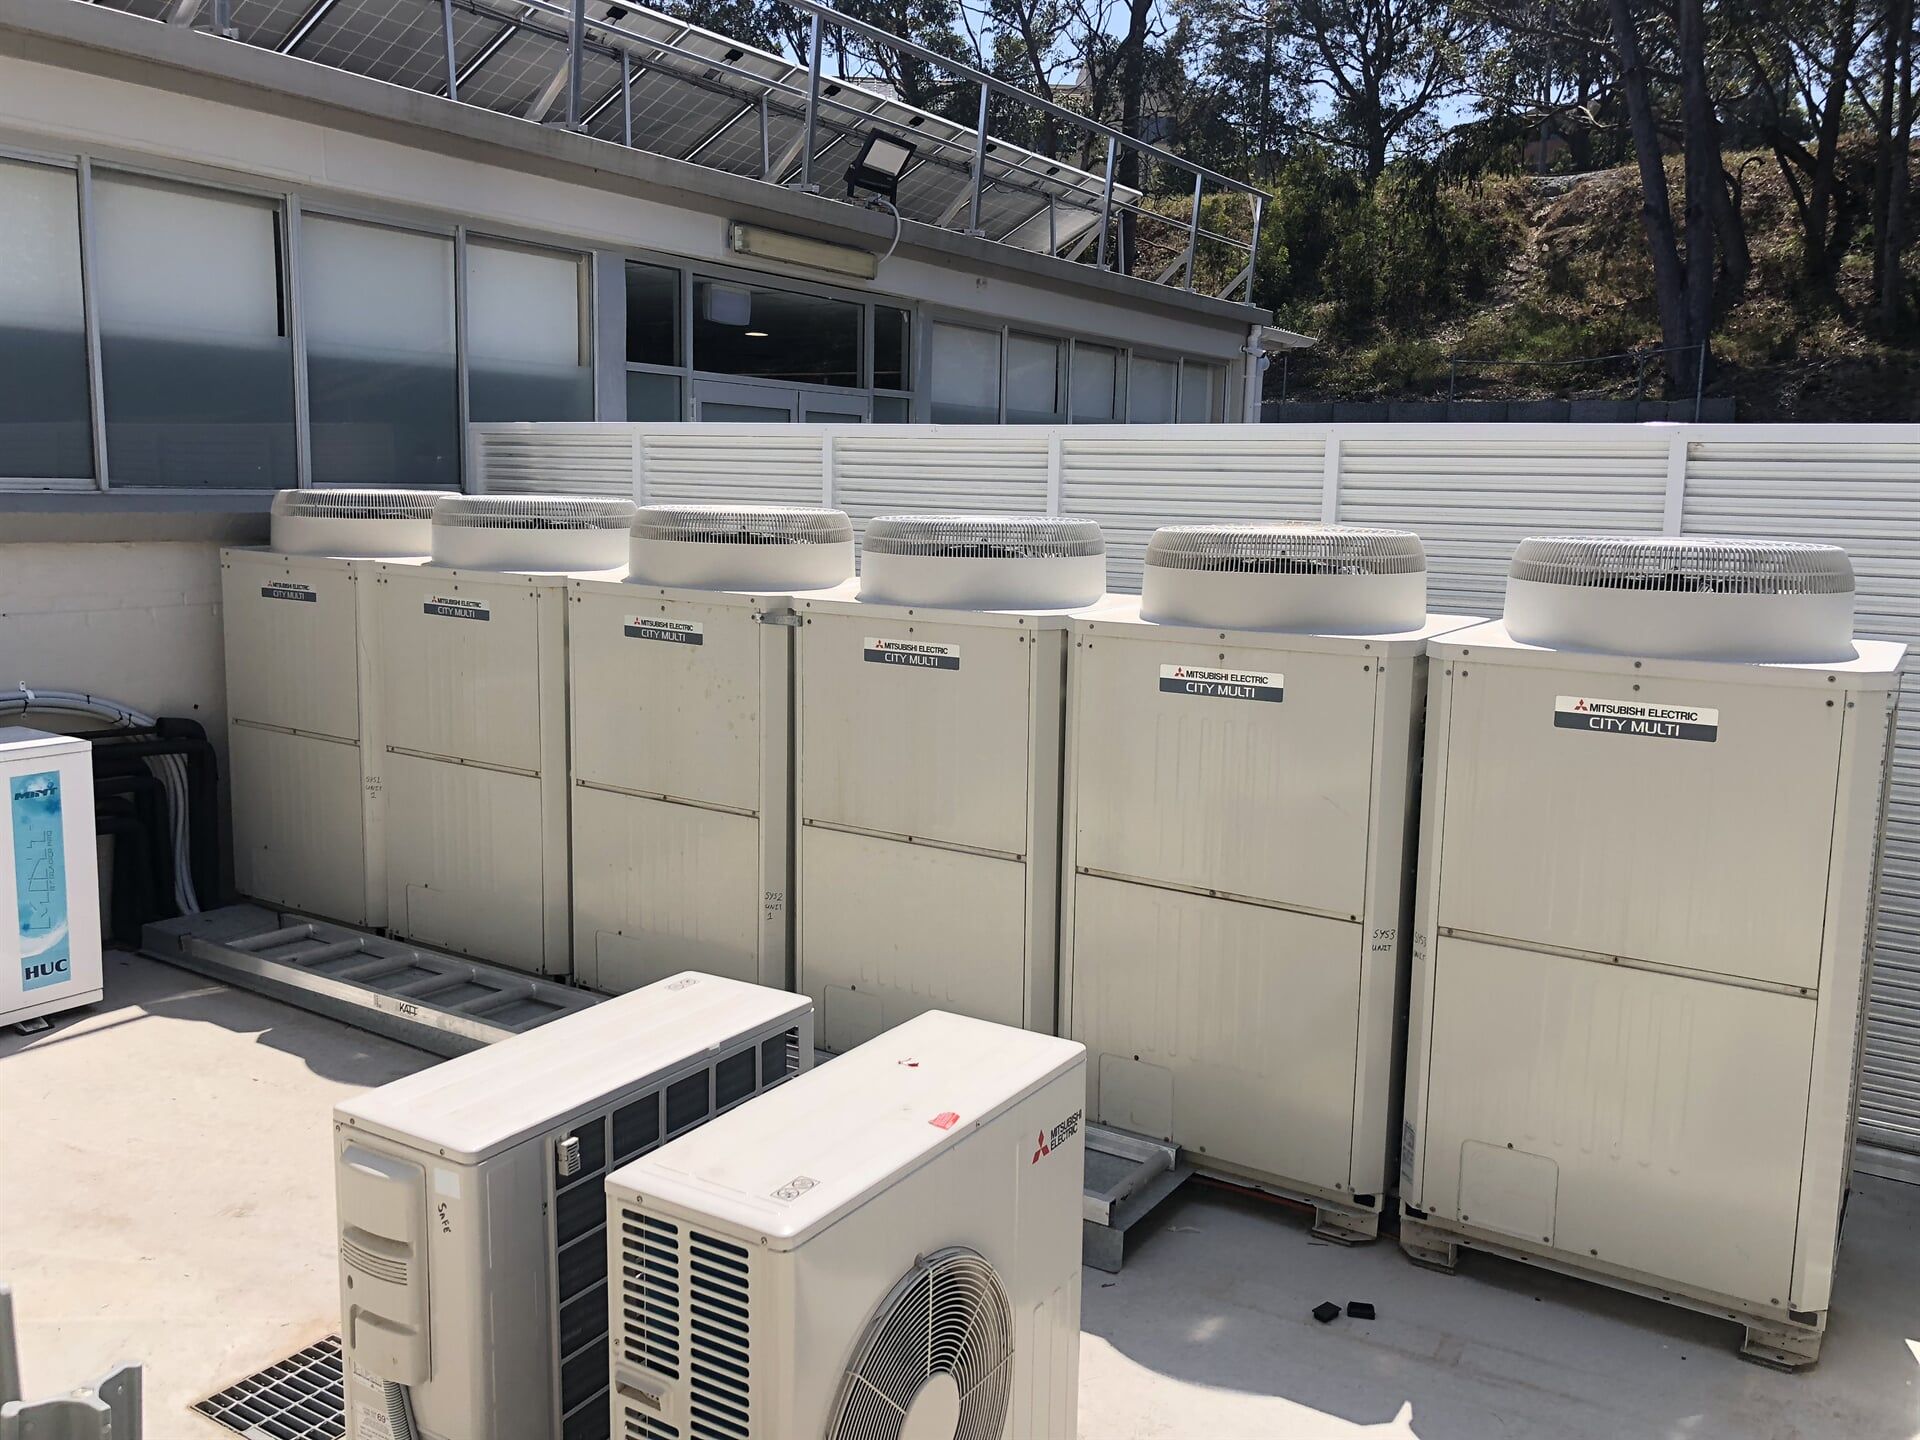 Couple operating Aircon — Residential & Commercial Airconditioning Repair in Batemans Bay, NSW